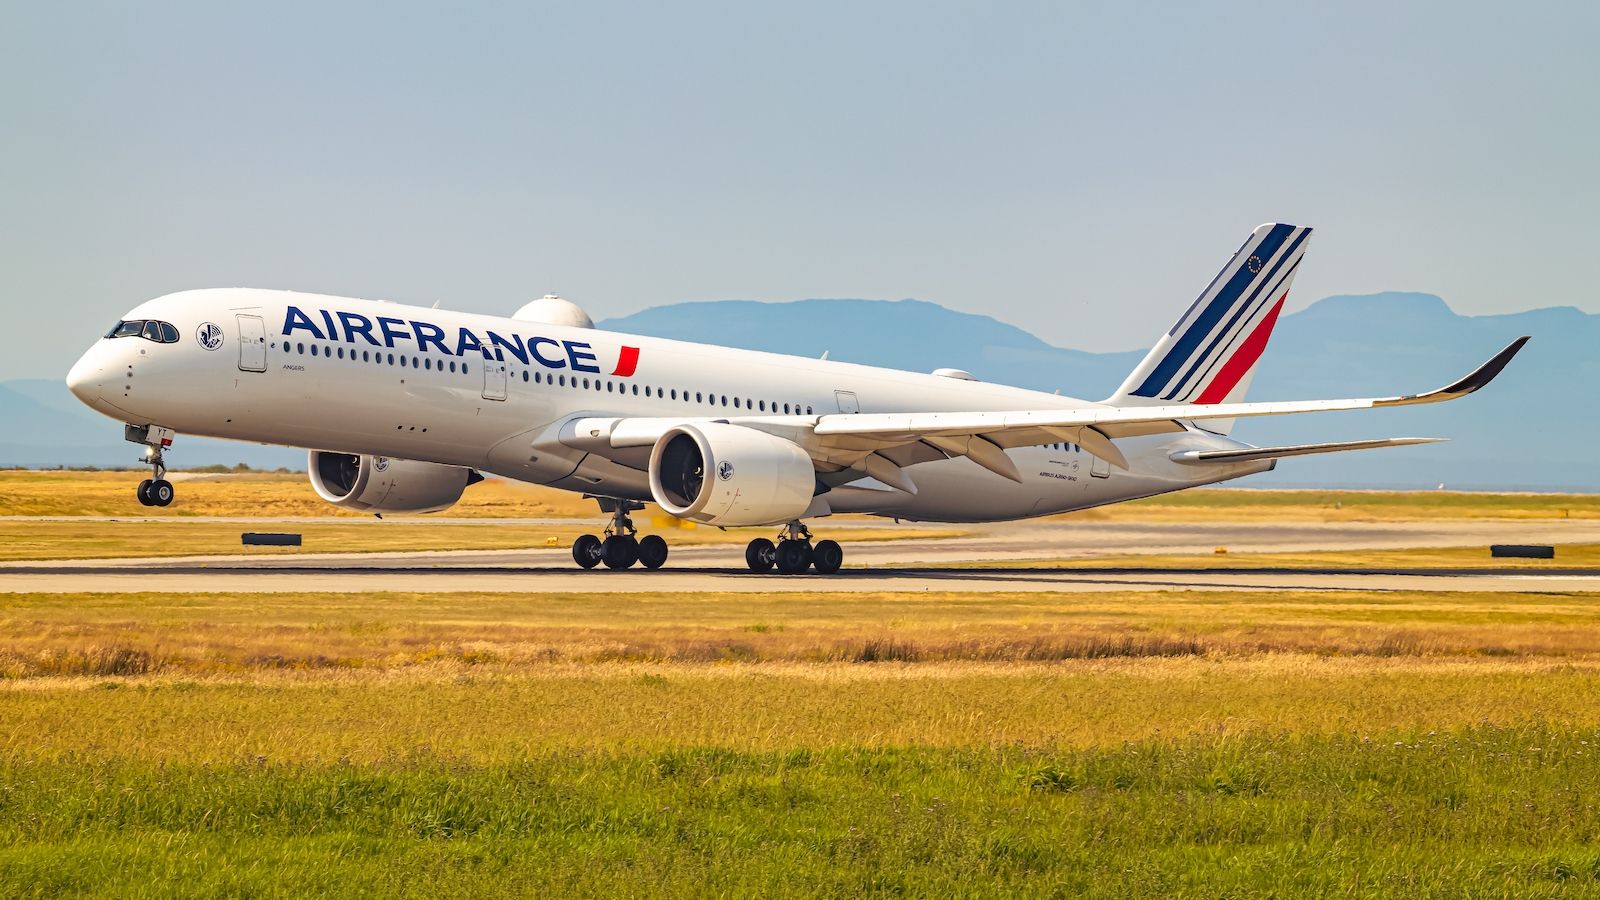 An Air france A350 about to take off.